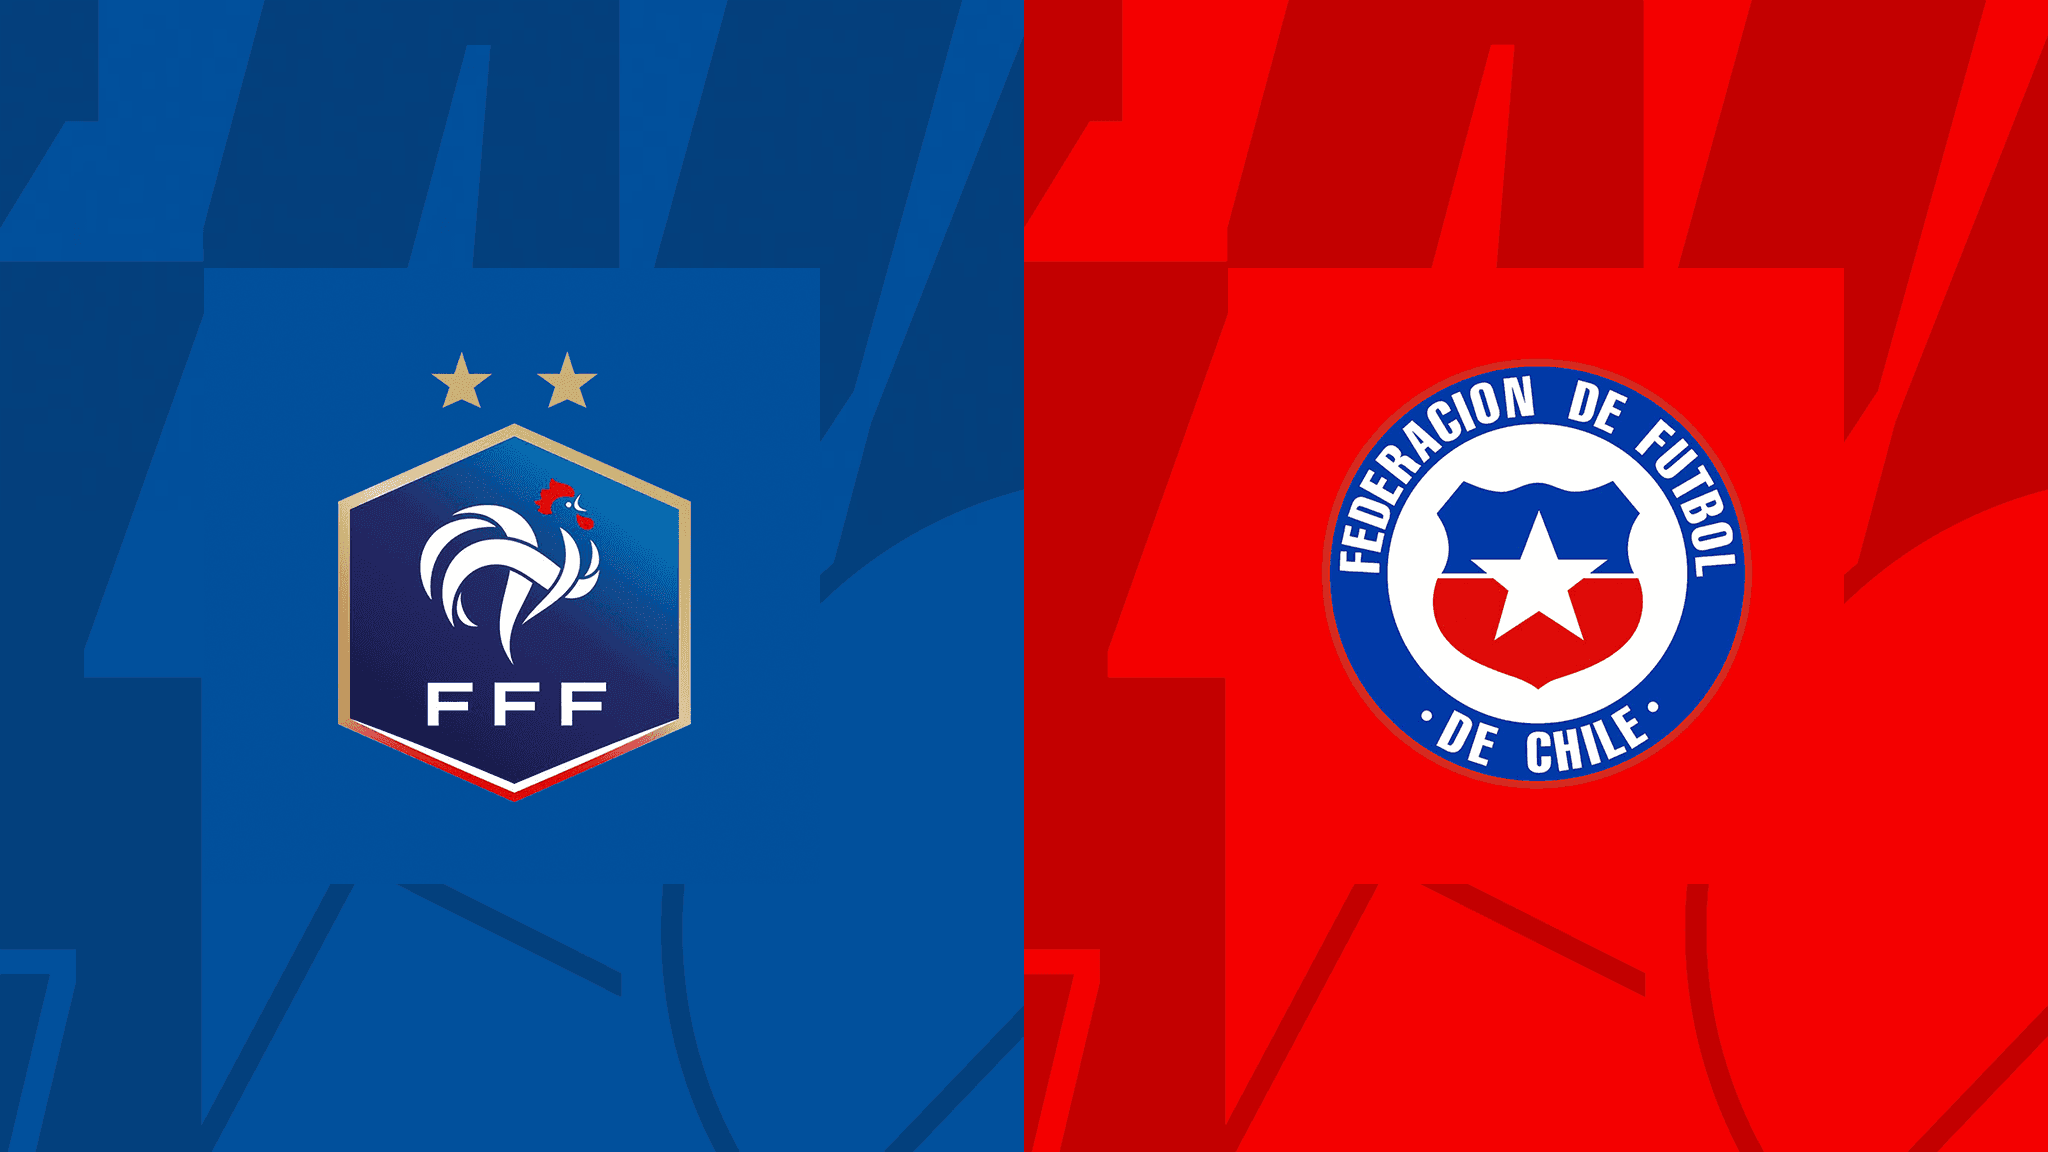 France vs. Chile: Date, kick-off time, stream info and how to watch international friendly match